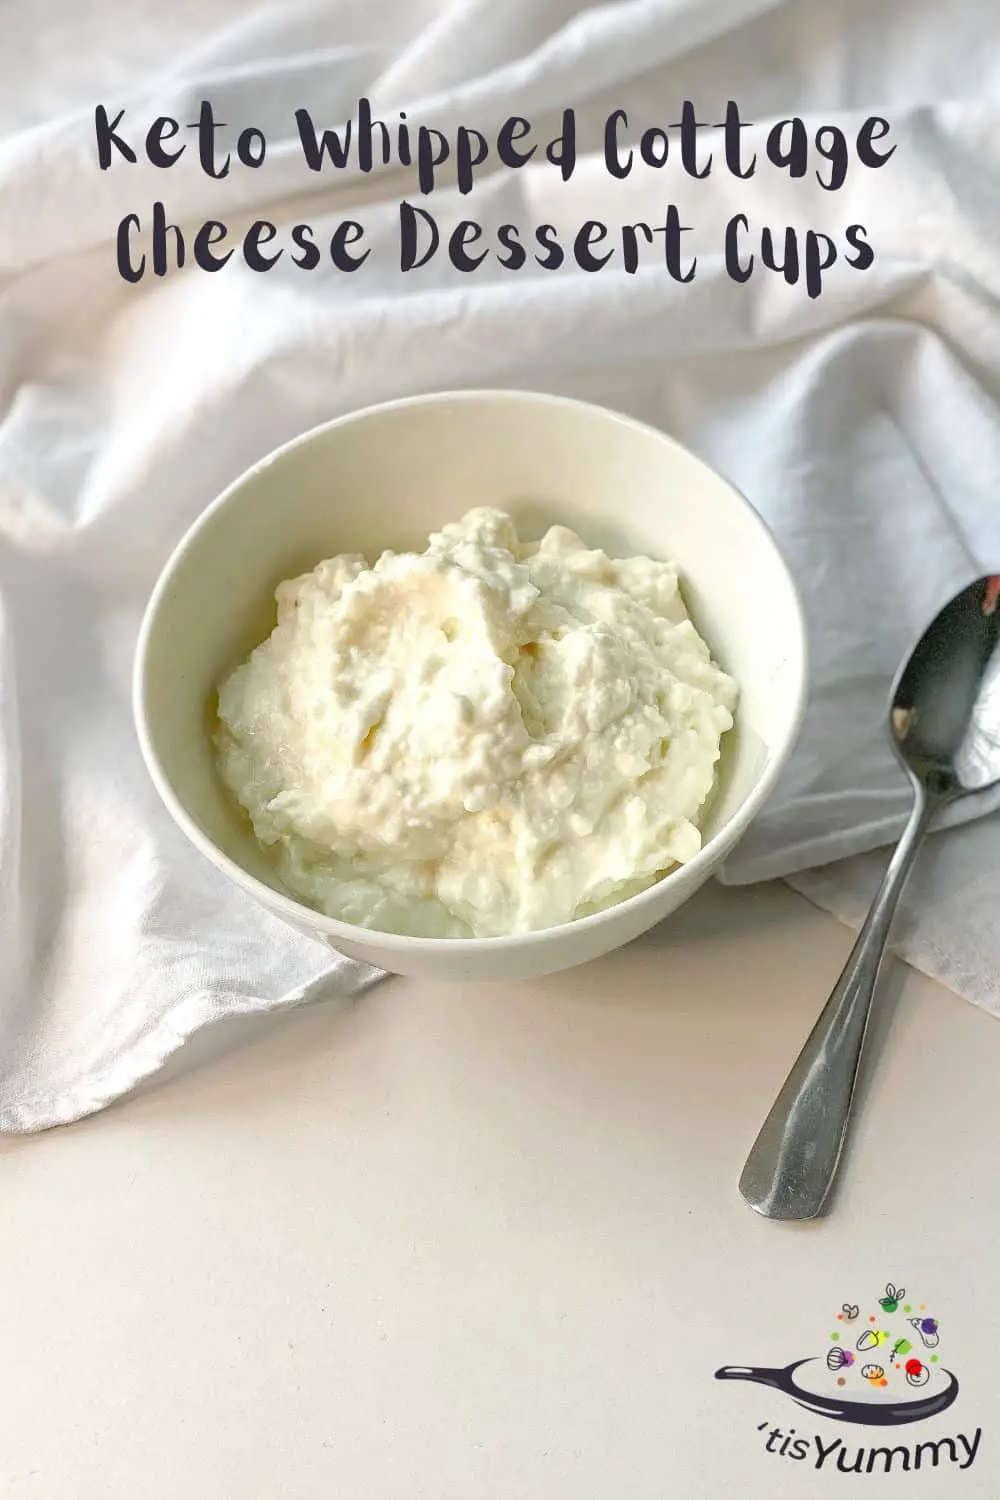 Keto whipped cottage cheese dessert cups